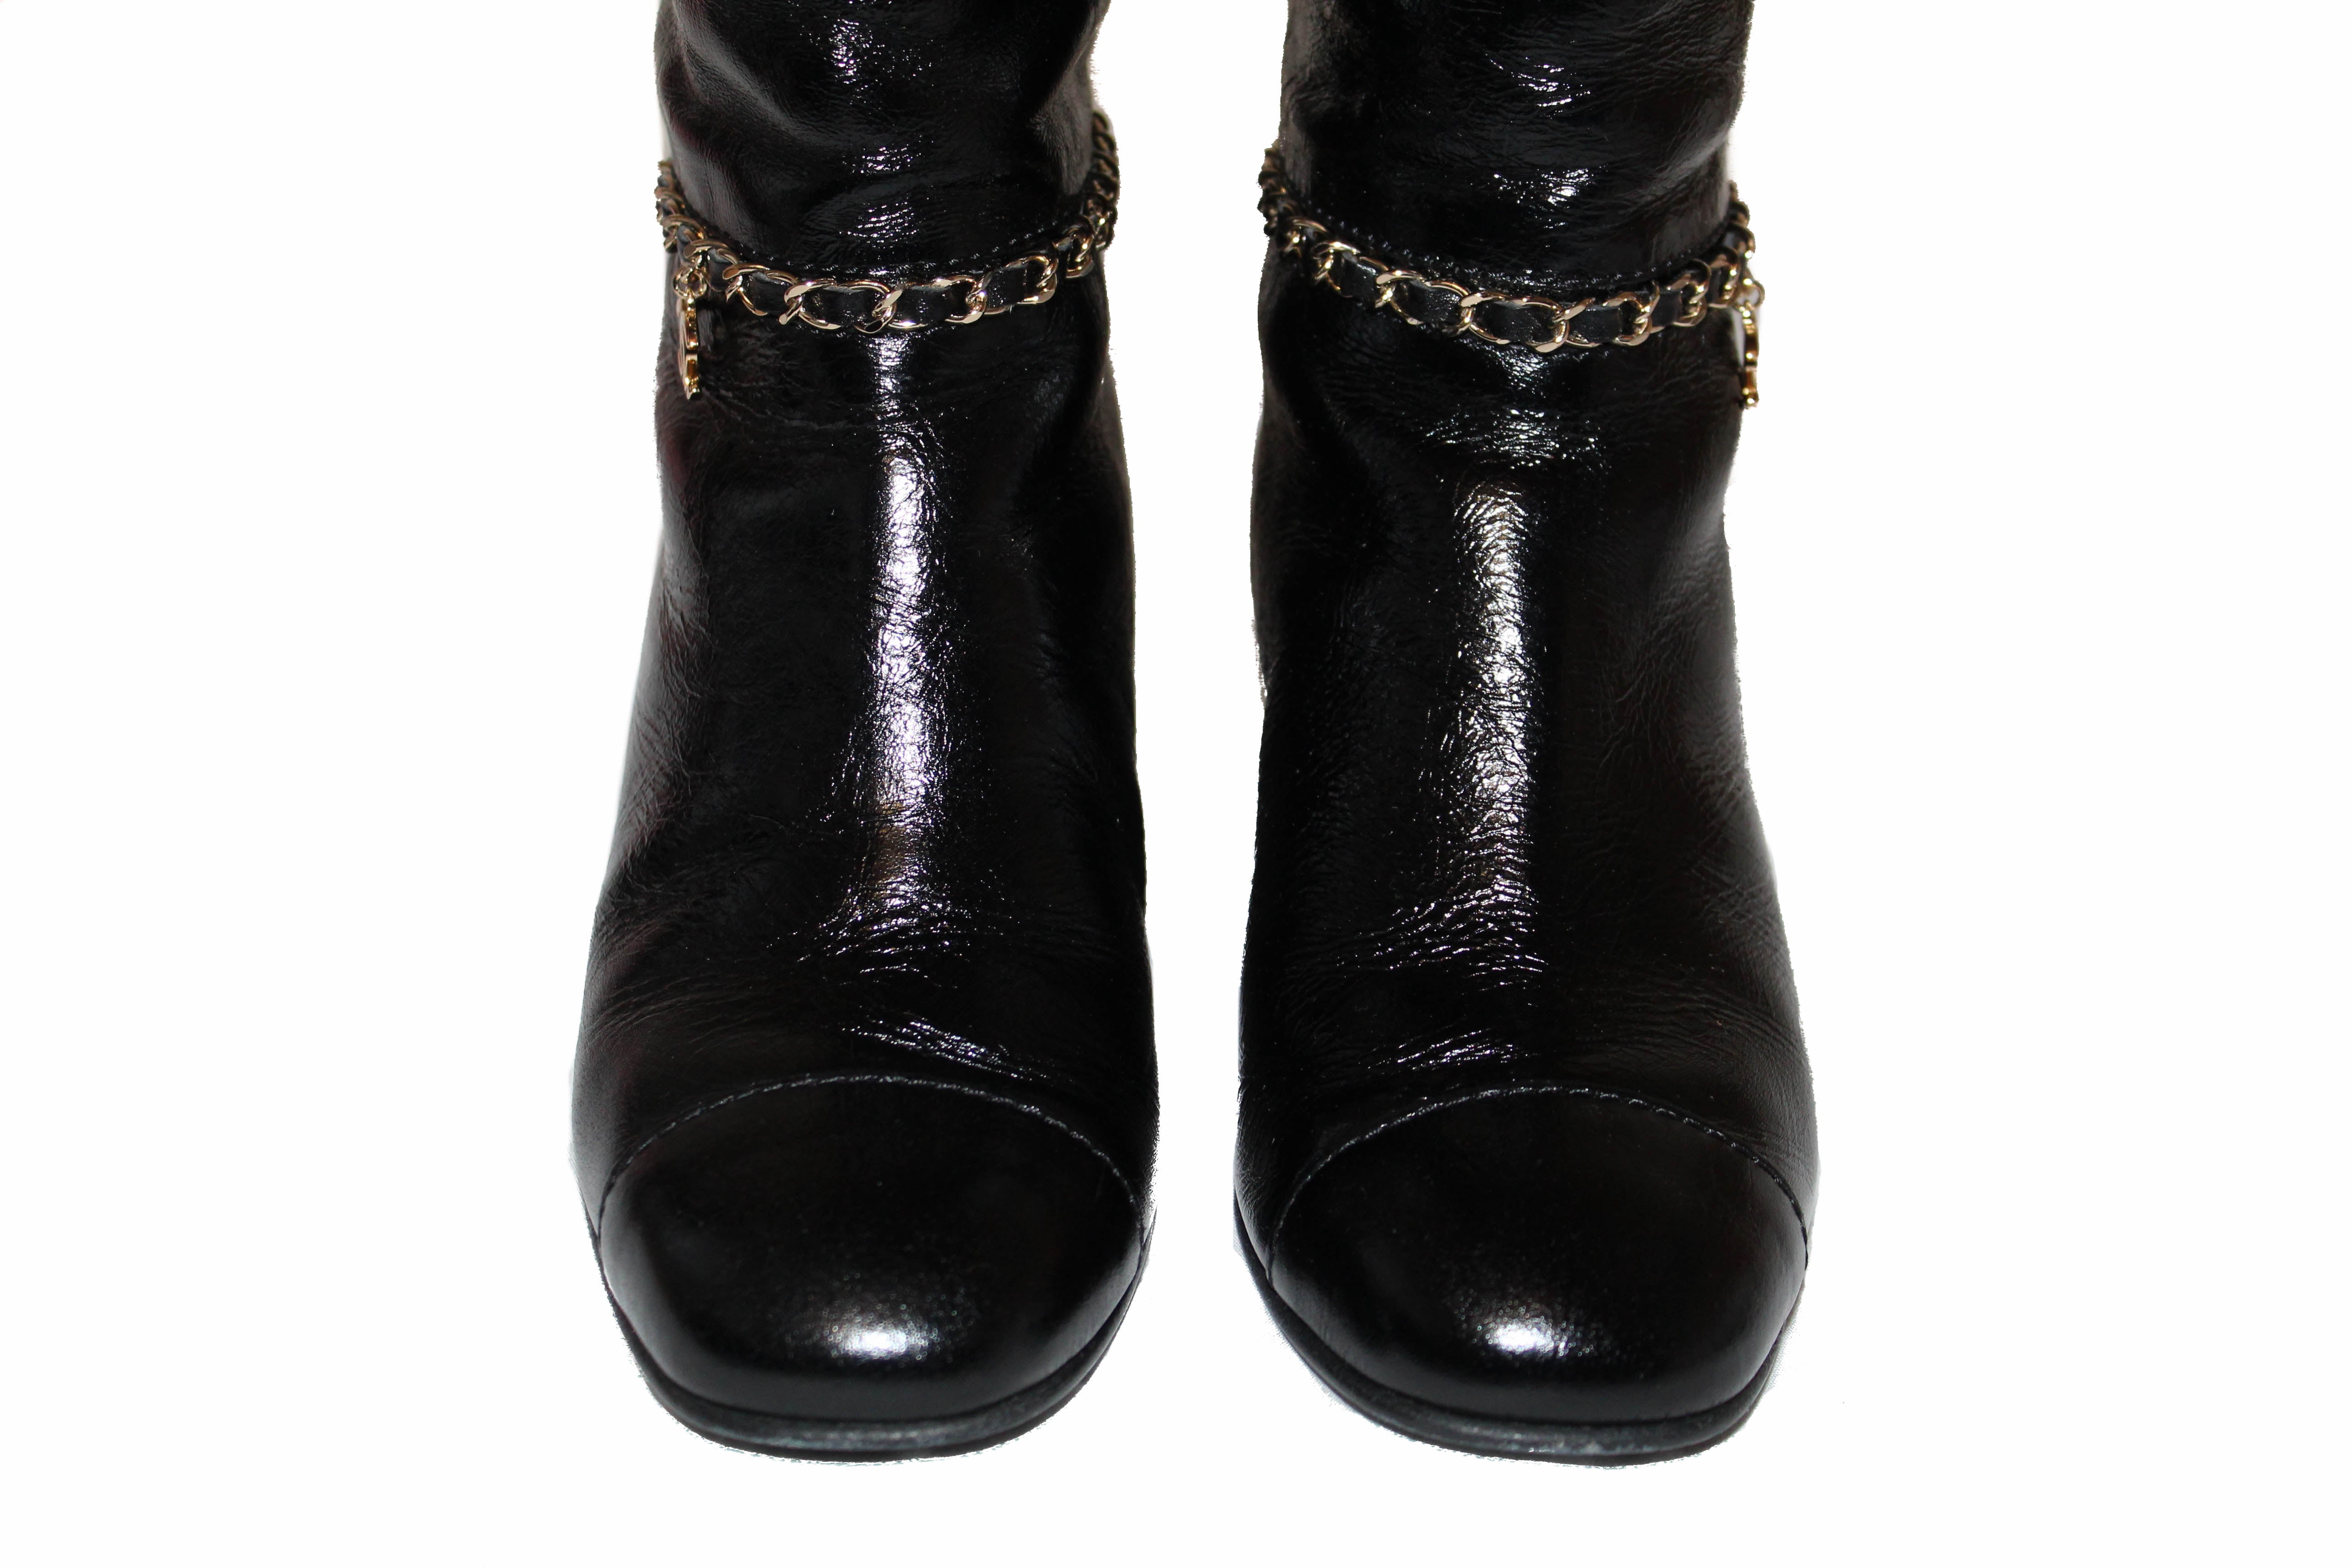 Authentic Chanel Black Patent Leather CC Logo Chain High Boots Size 36c